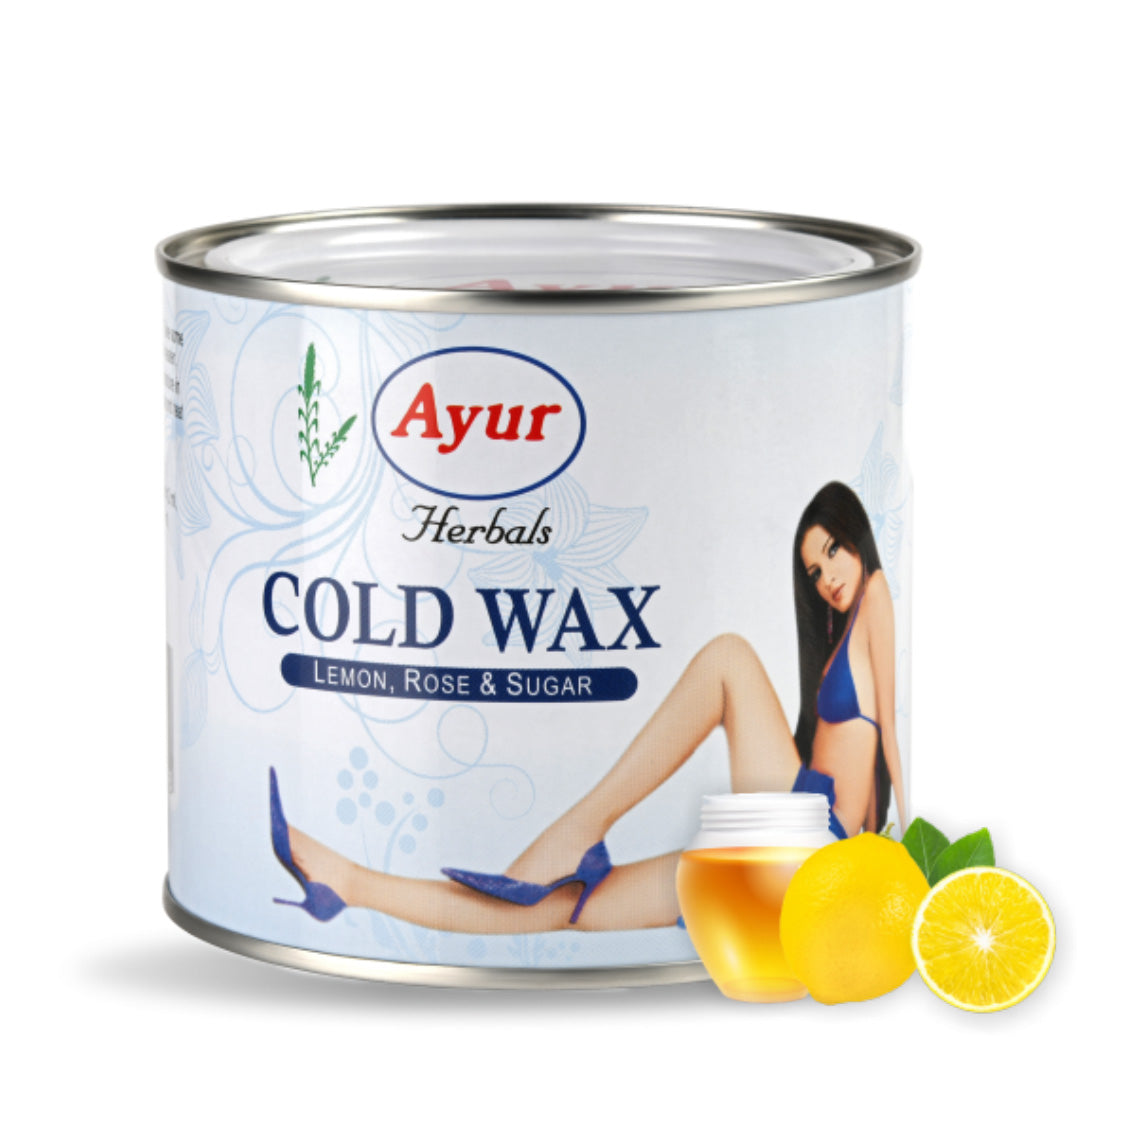  Ayur Herbals Cold Wax - 600g x 1 Can : Beauty